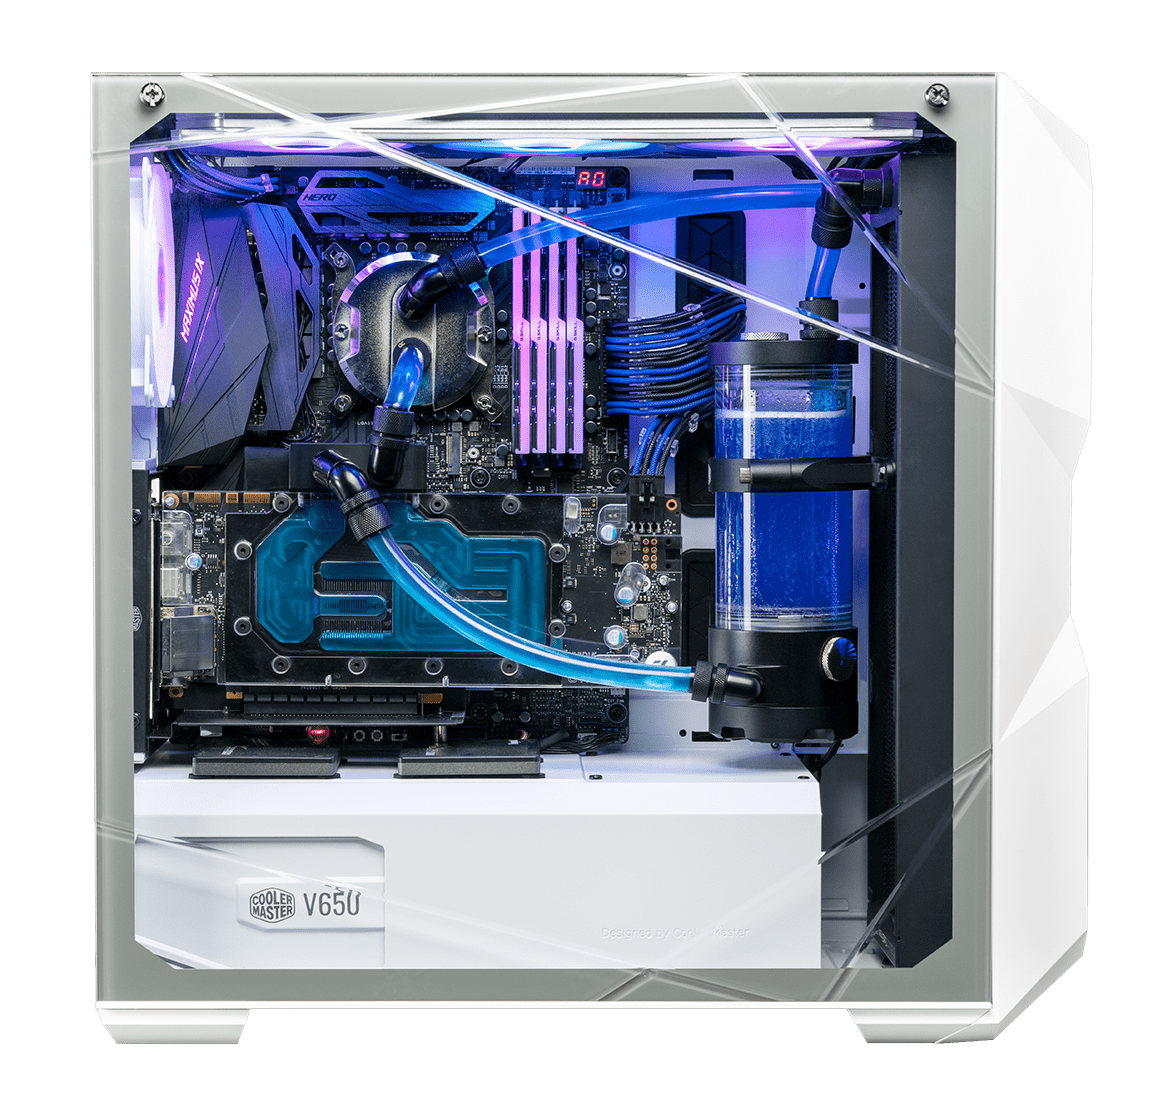 Premature Mastery Like MasterBox TD500 Mesh Mid Tower Case | Cooler Master